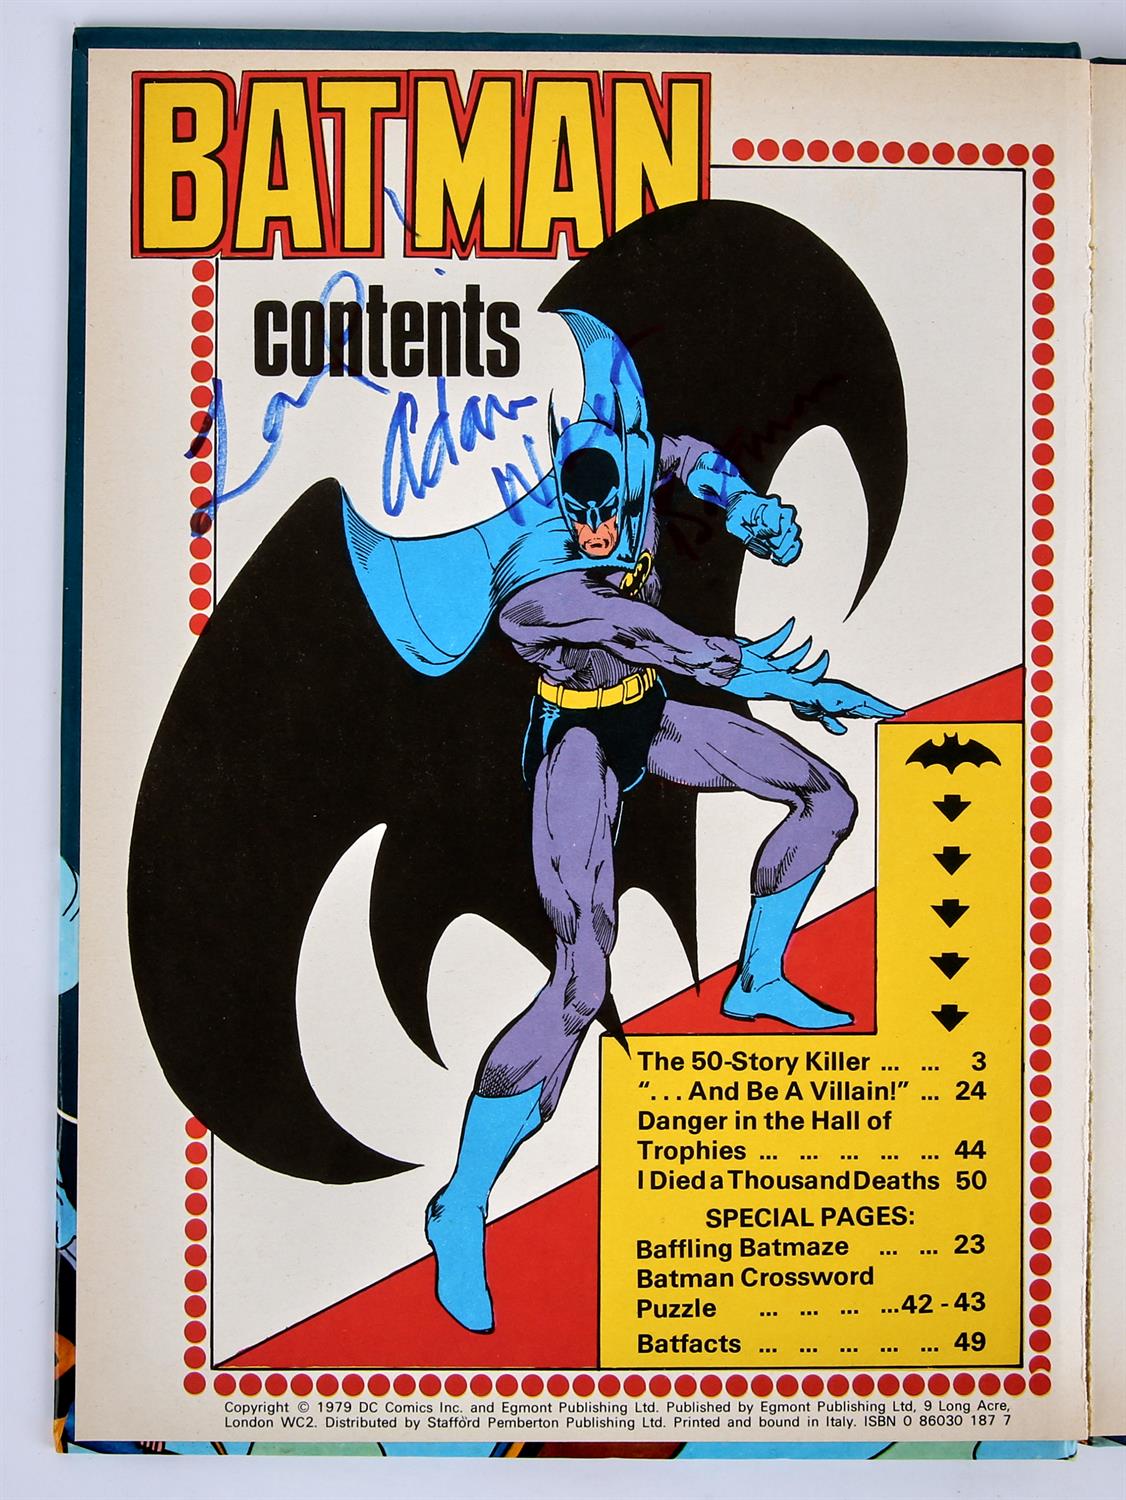 Batman Annual 1980 Signed by Adam West (1980) This lot features: Batman official Annual 1980, - Image 3 of 3